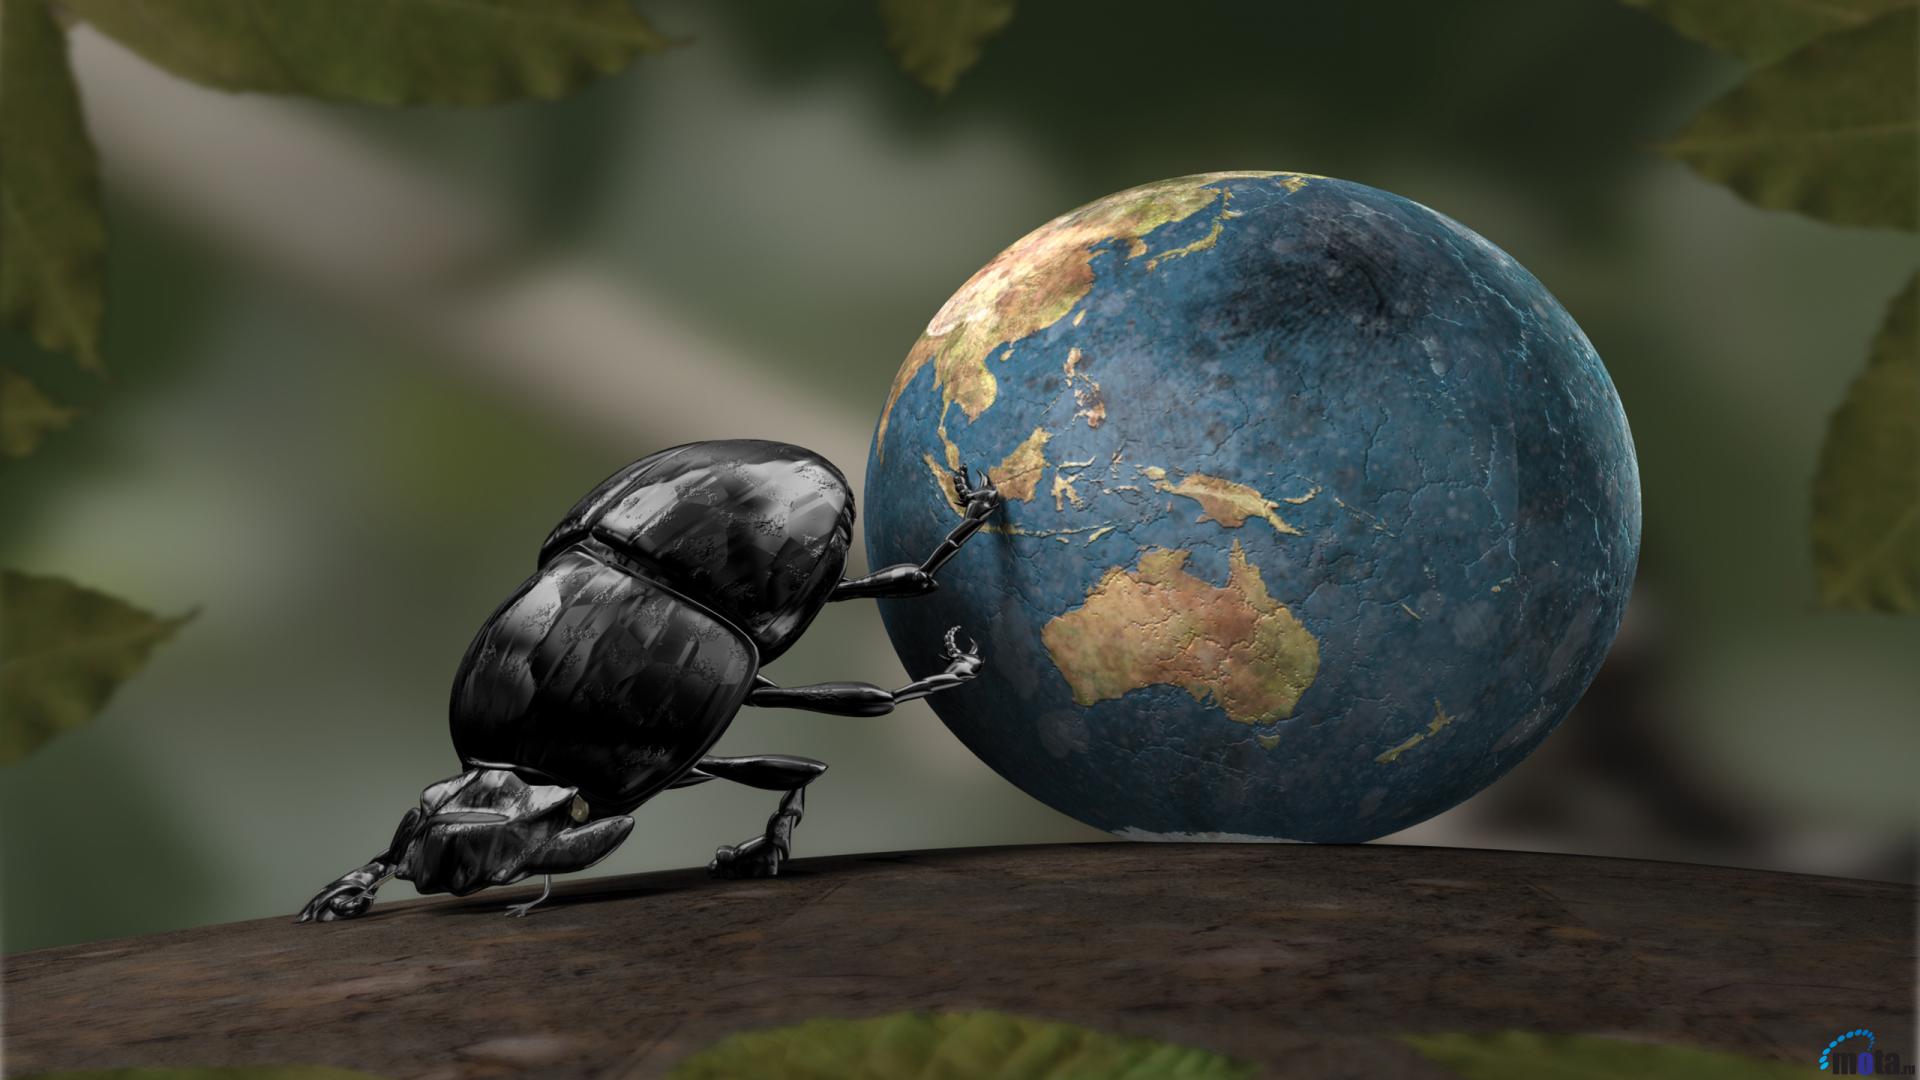 Download Wallpaper Earth-boring dung beetle (1920 x 1080 HDTV ...